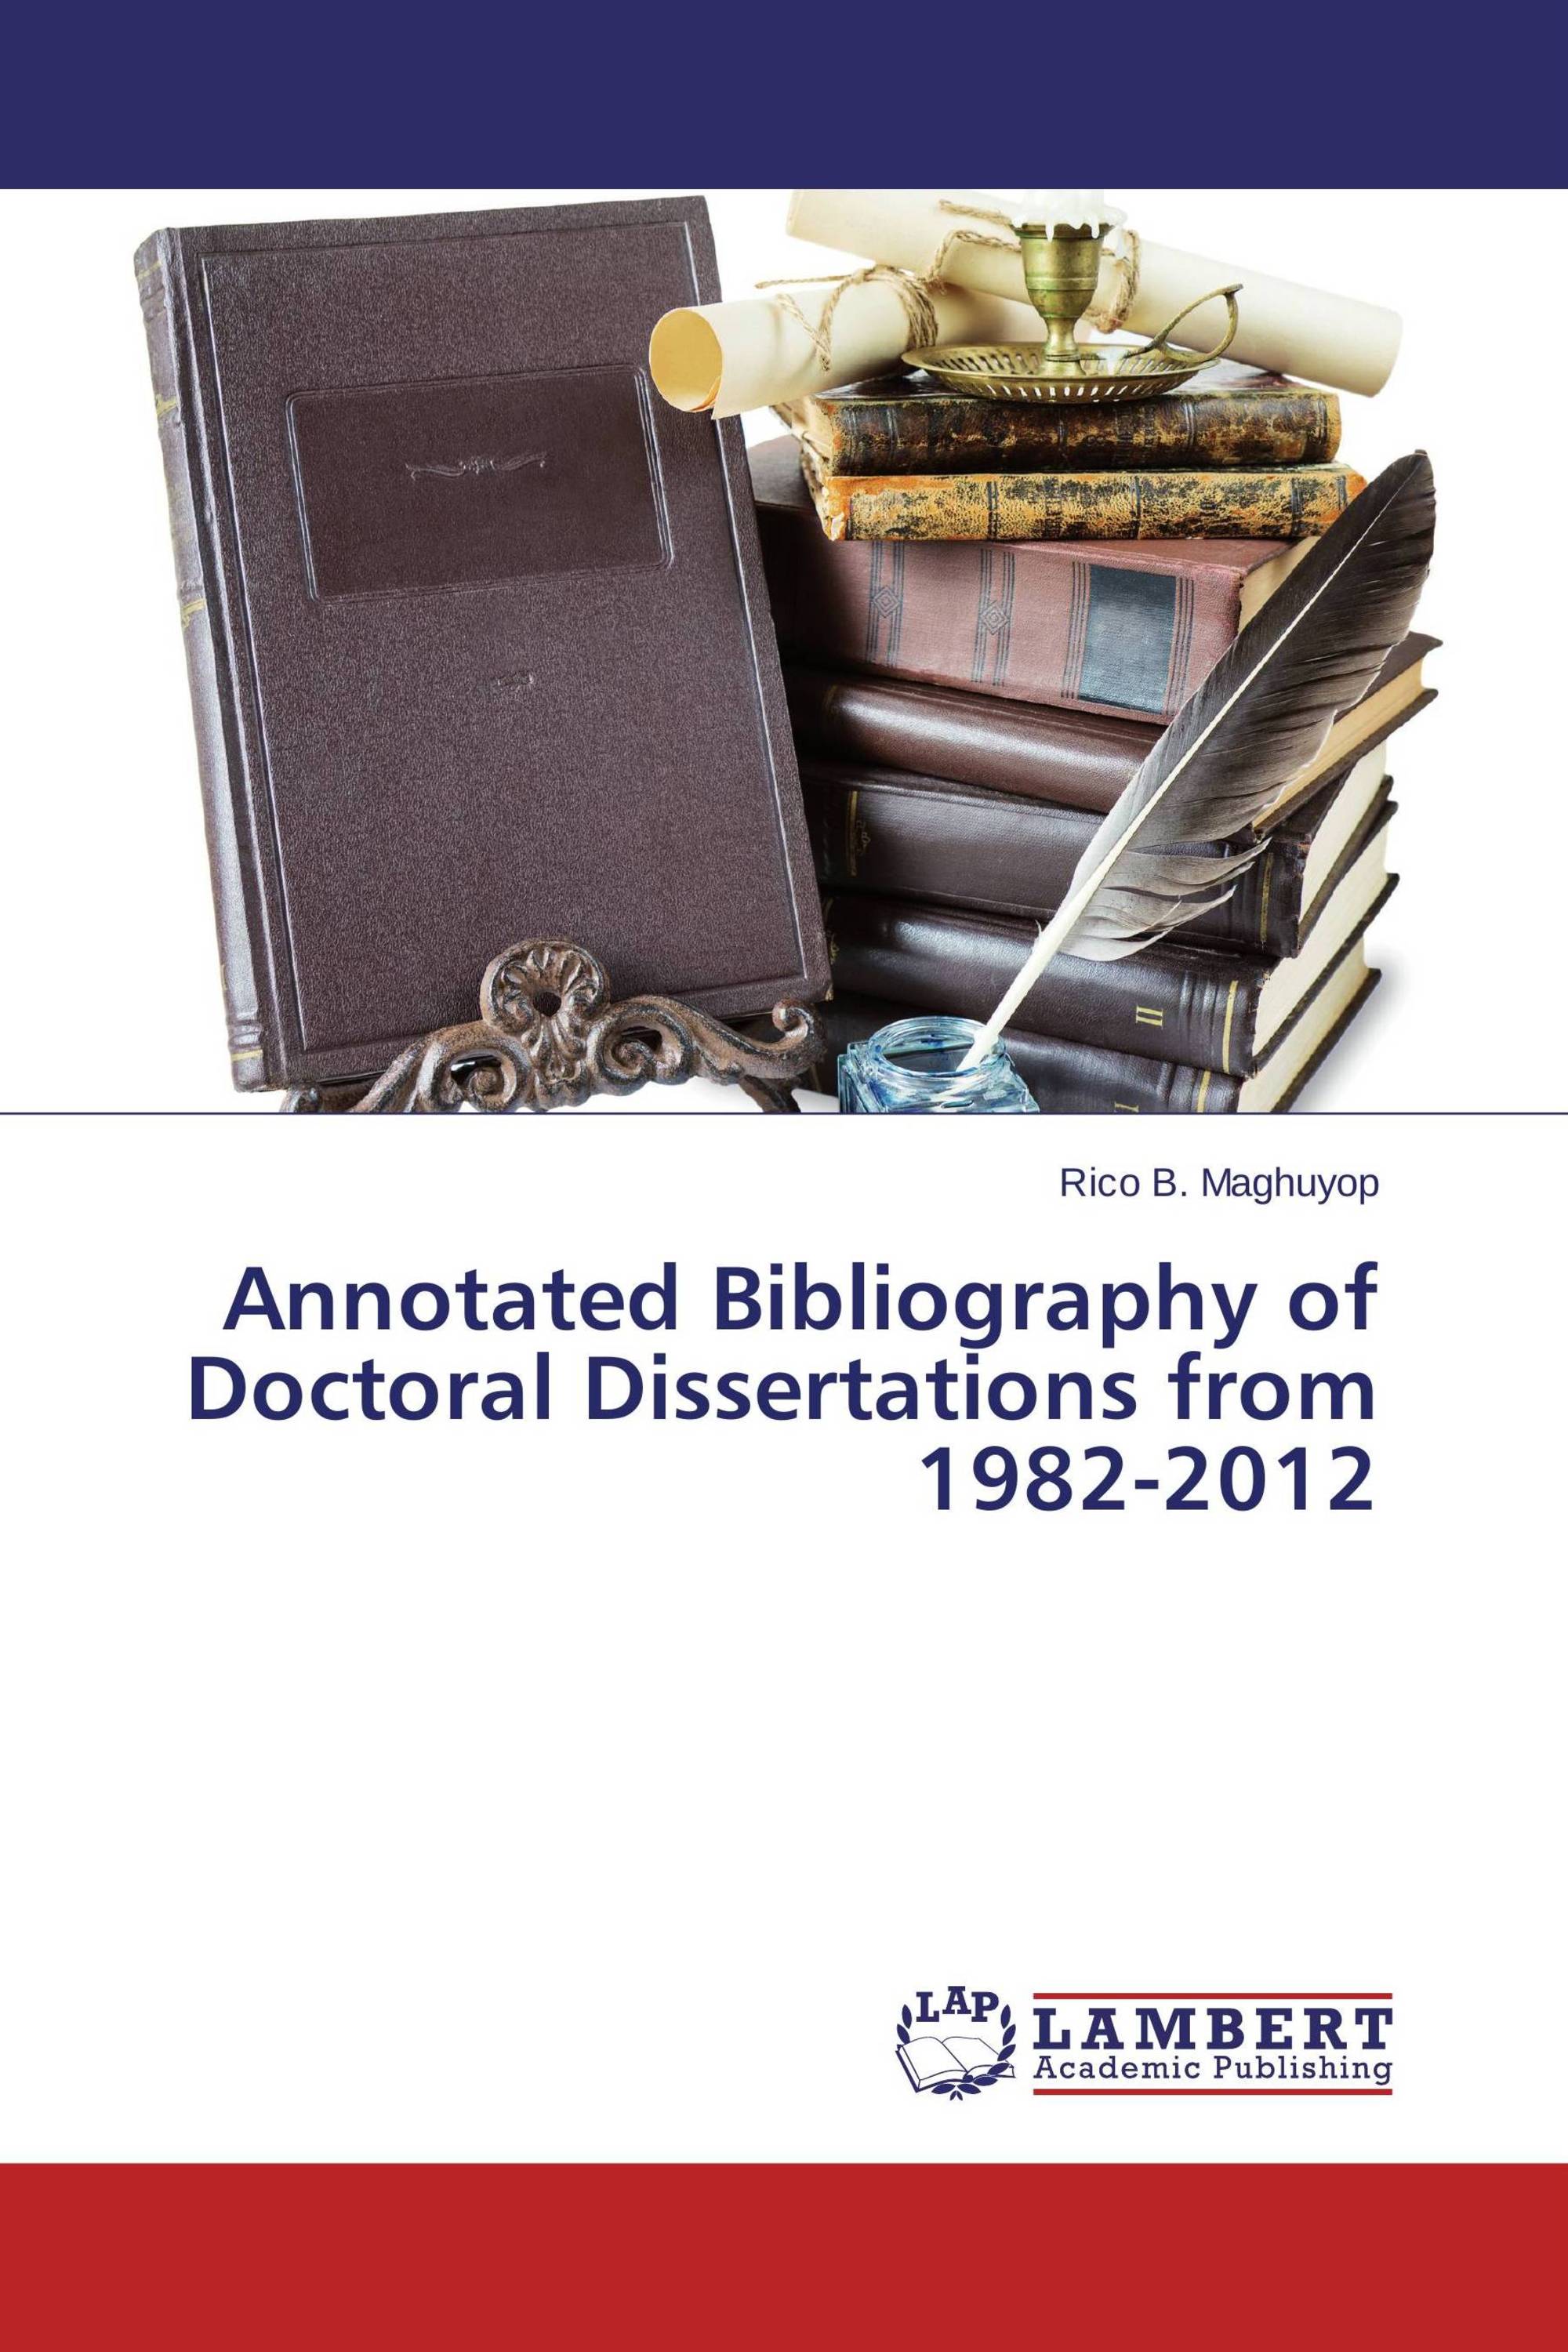 how long are doctoral dissertations